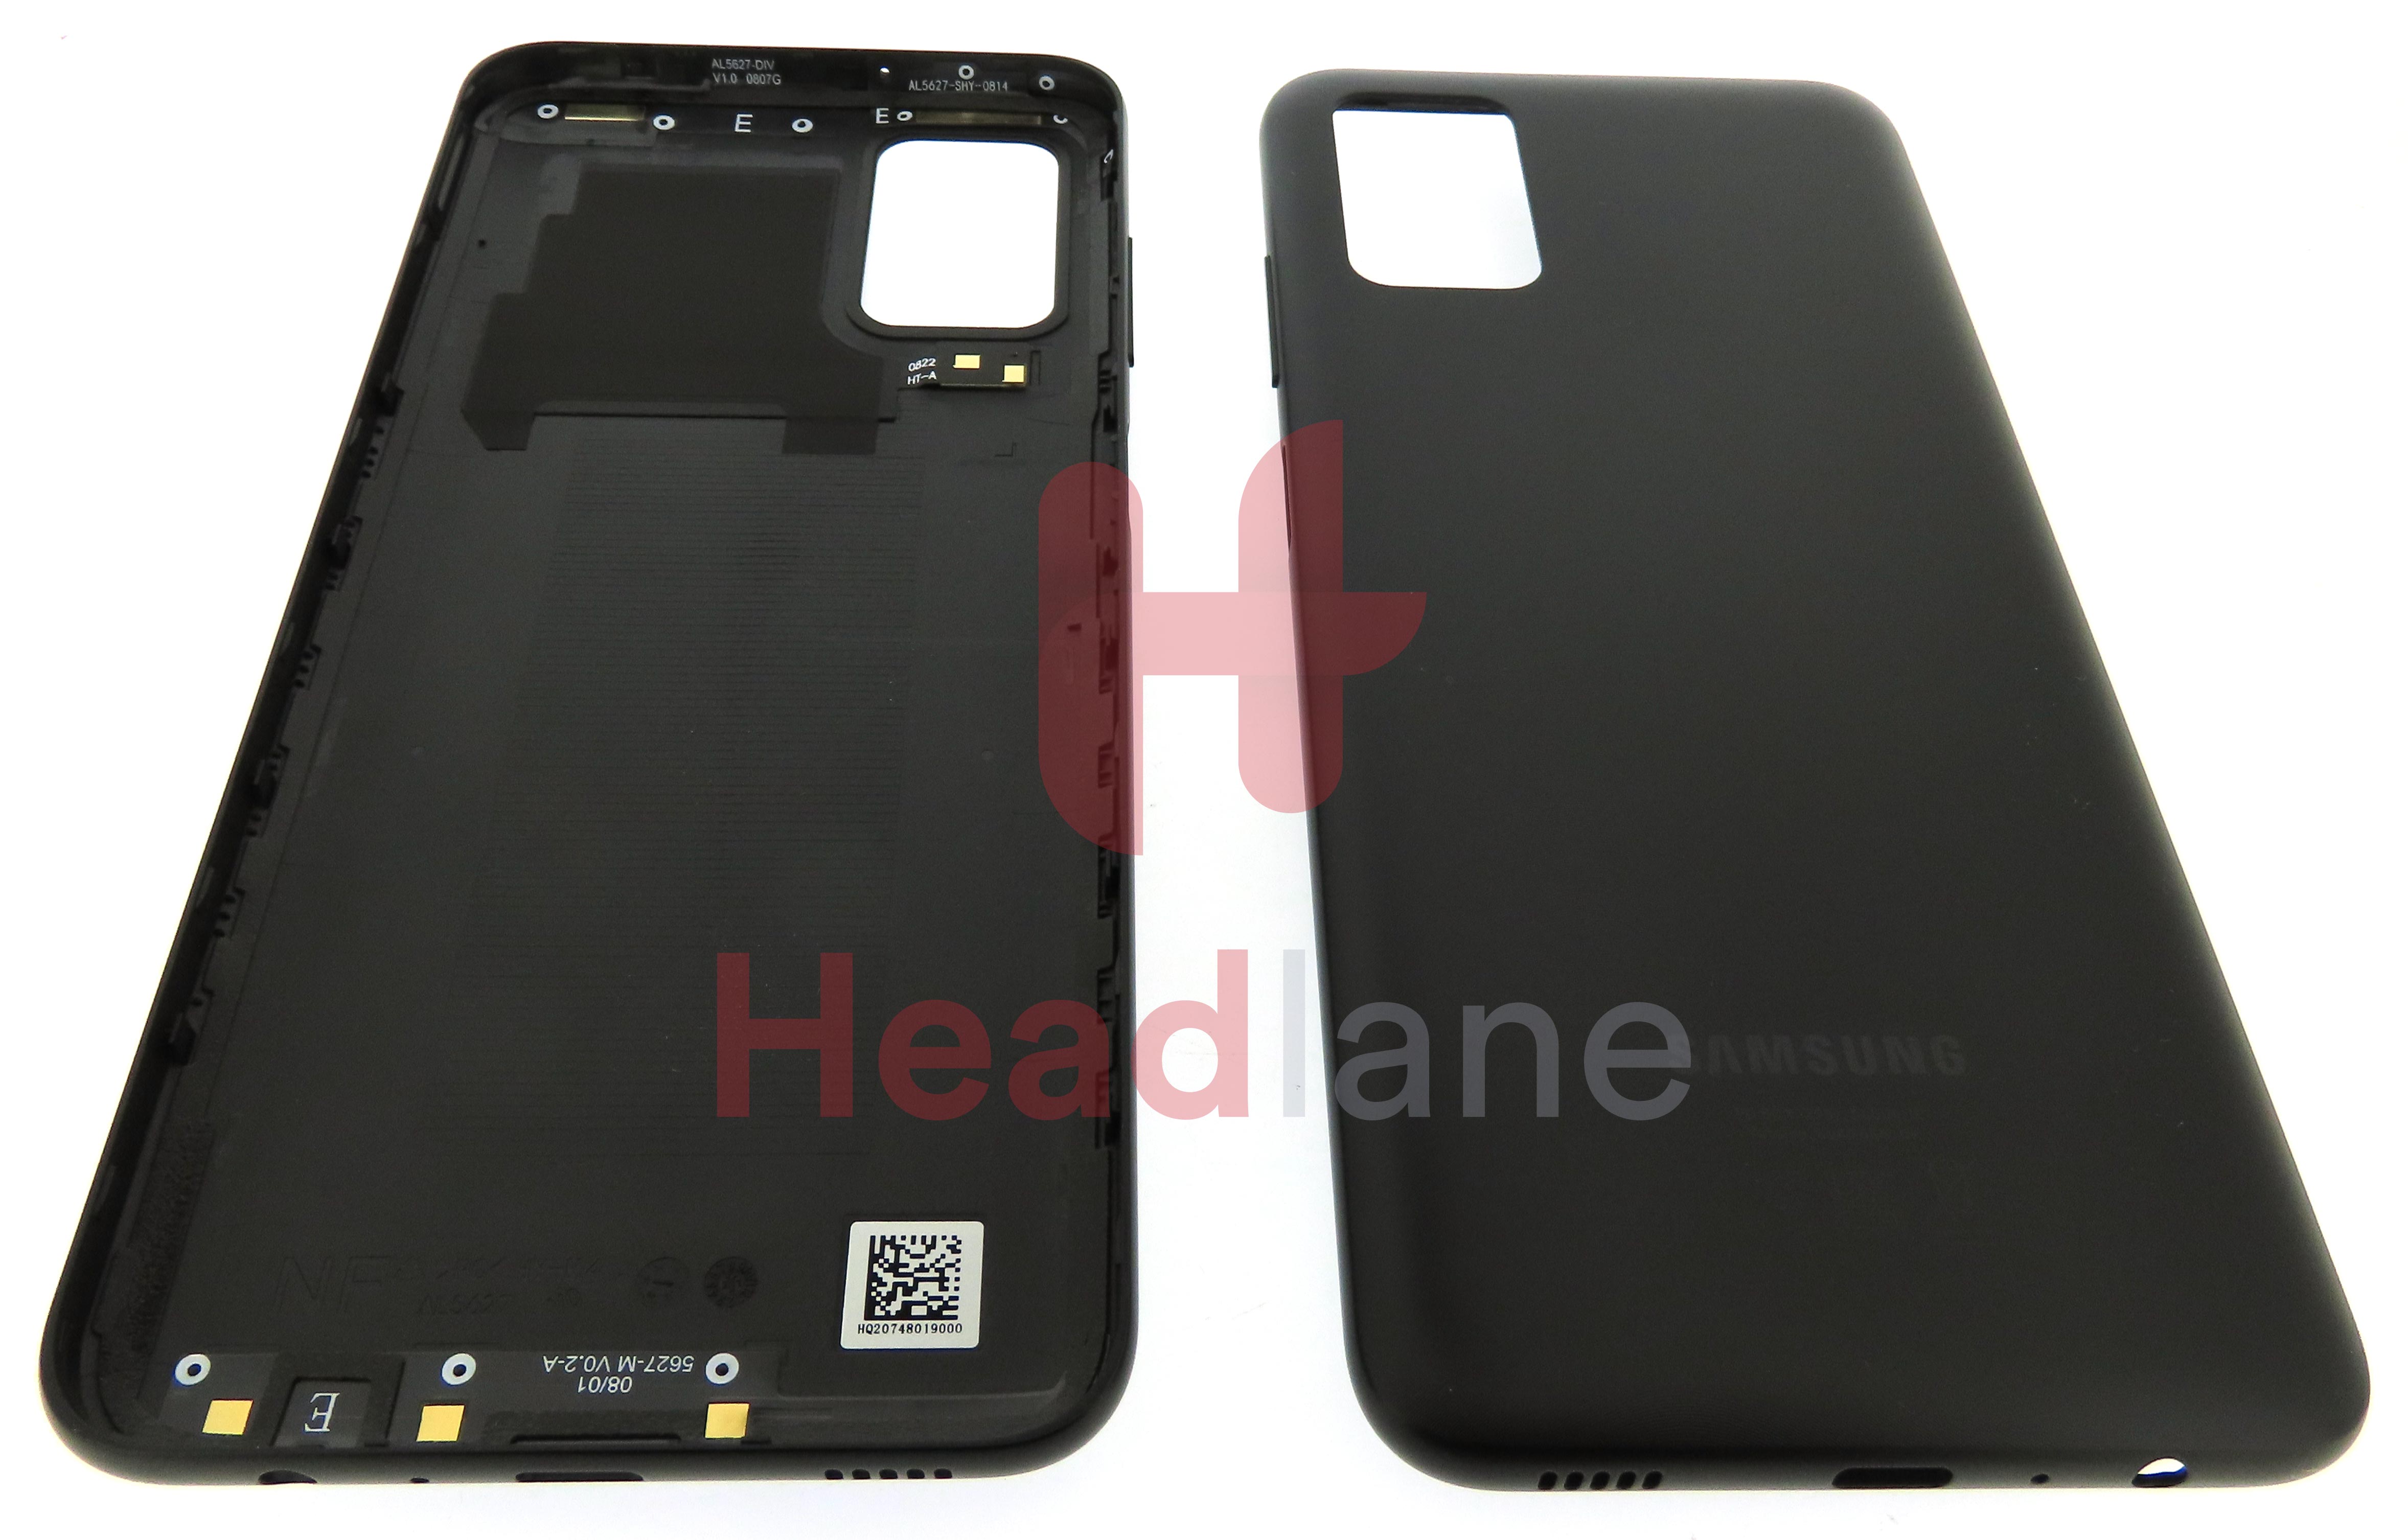 Samsung SM-A037 Galaxy A03s Back / Battery Cover - Black